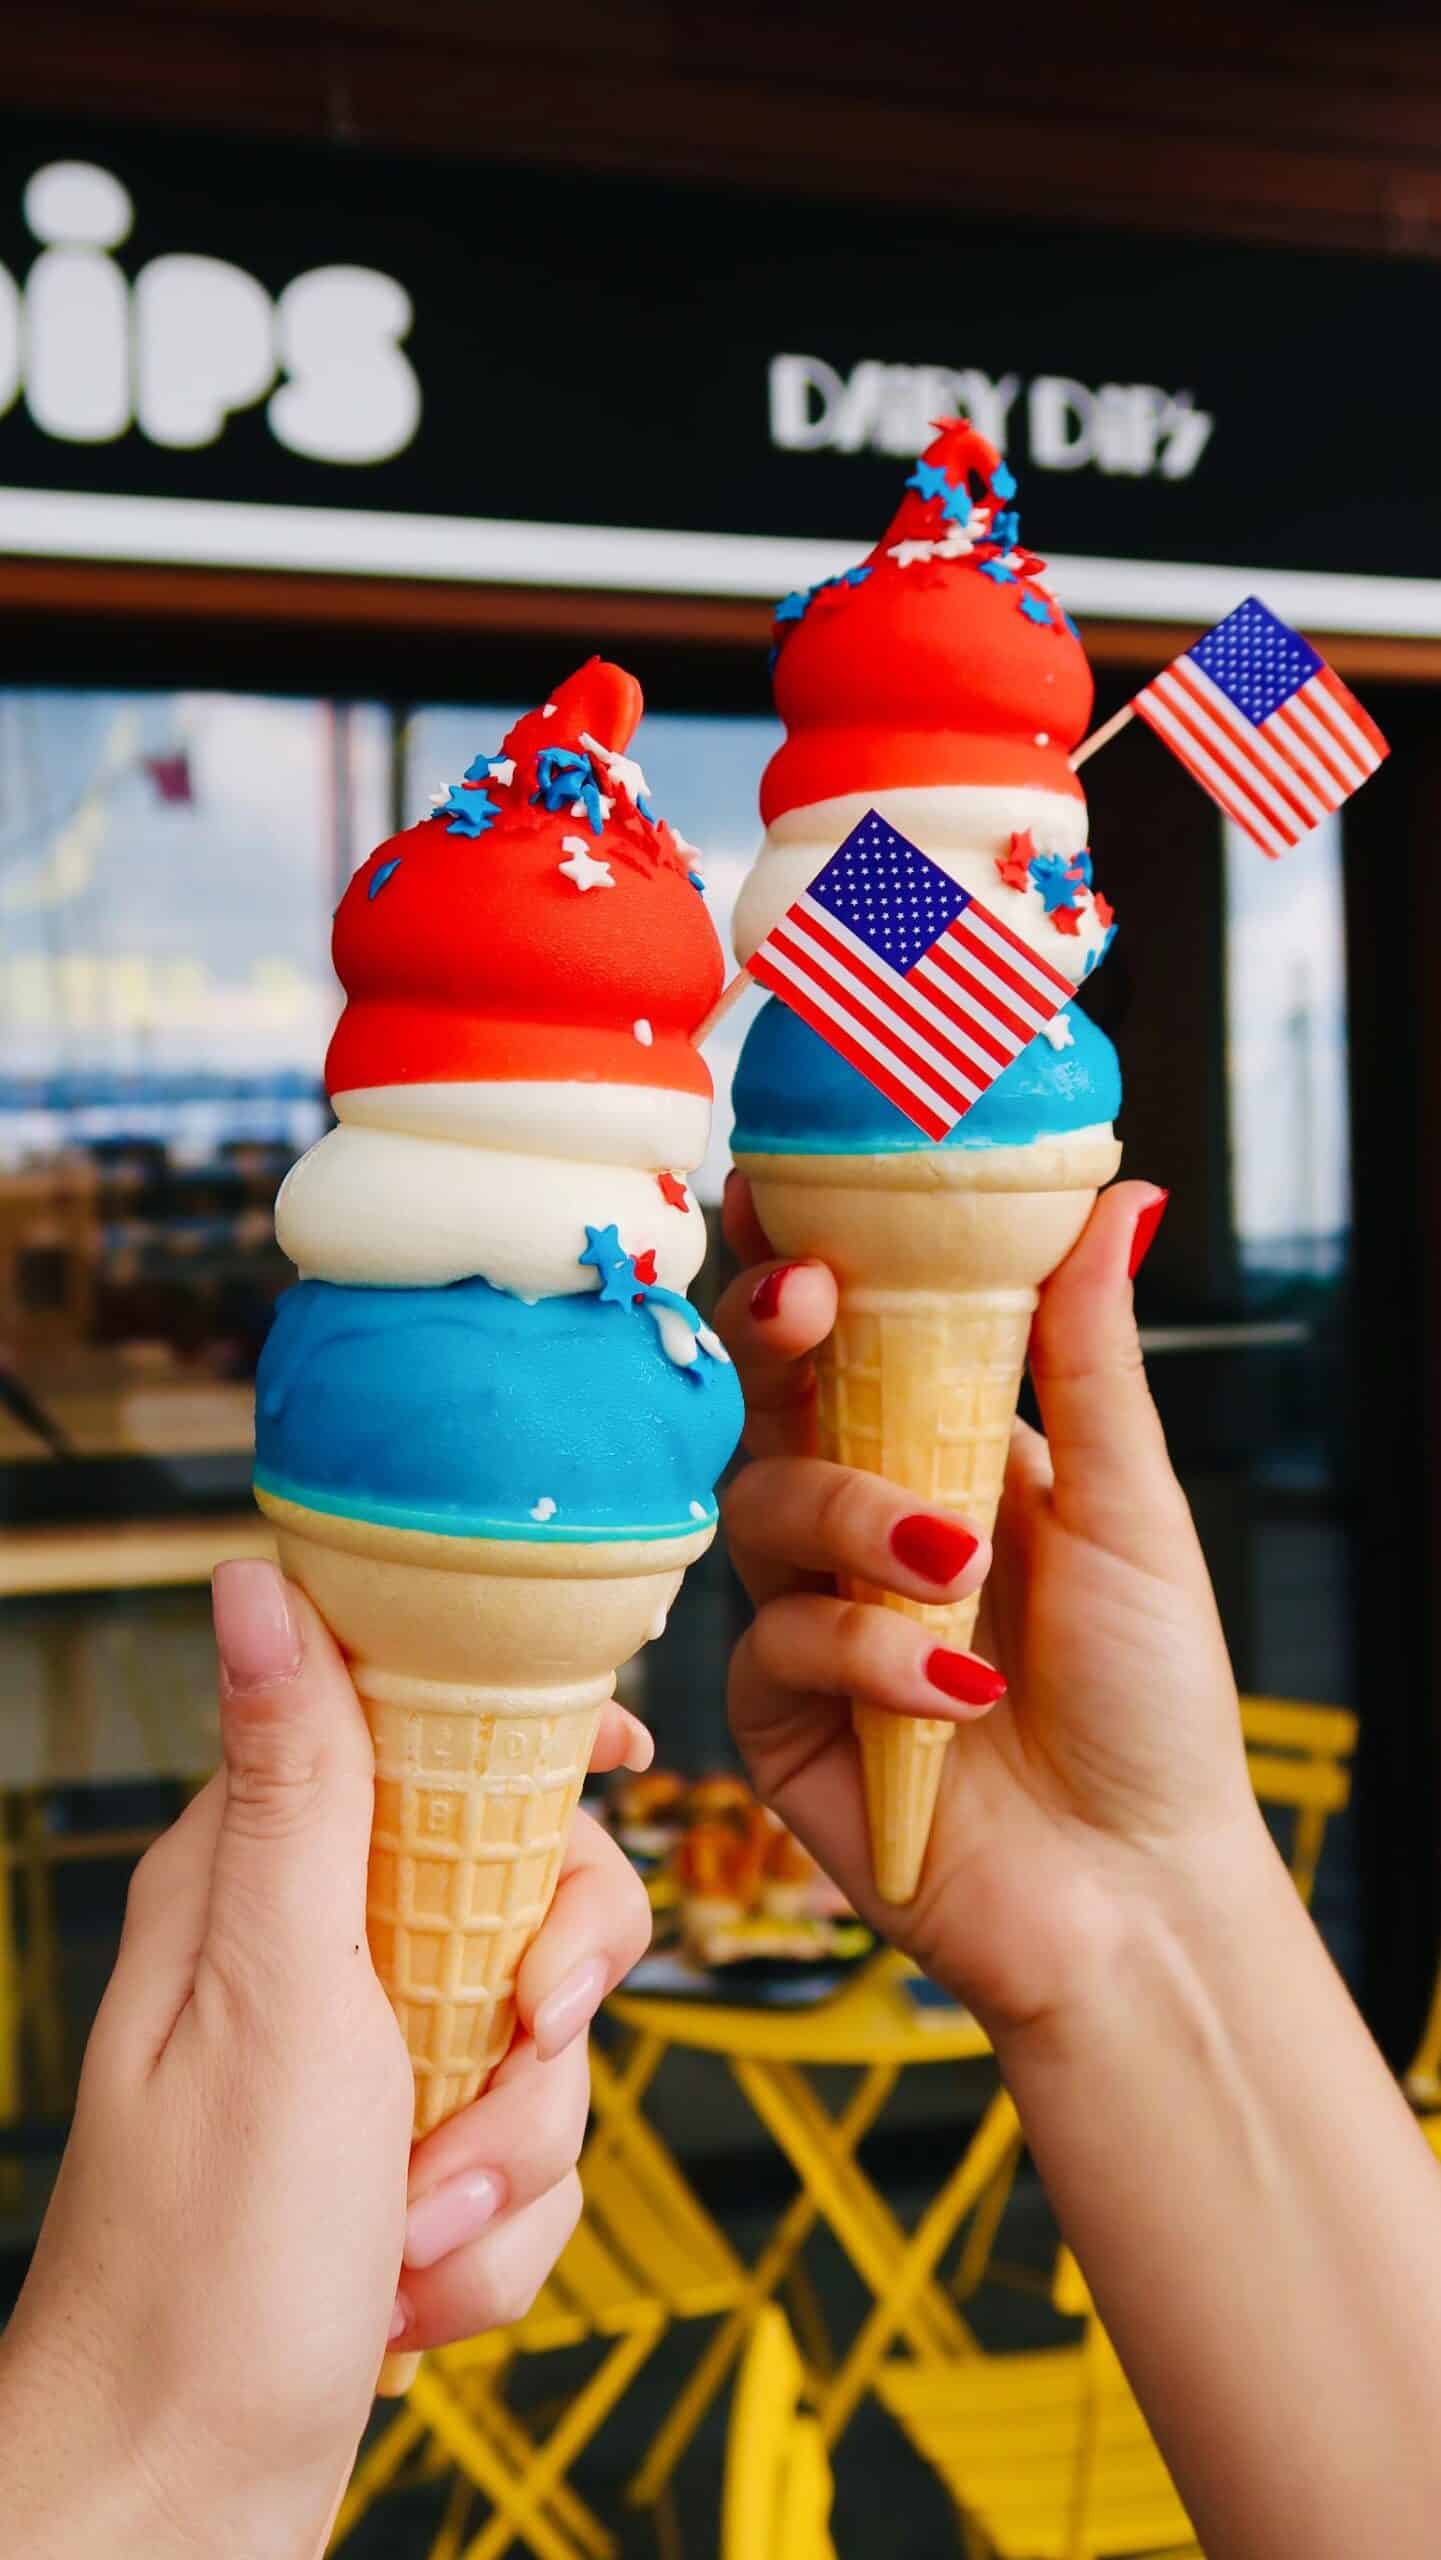 Celebrate the 4th with some festive sweetness @eatmisterdips with their July cone – the Summer Patriot #TheSeaport